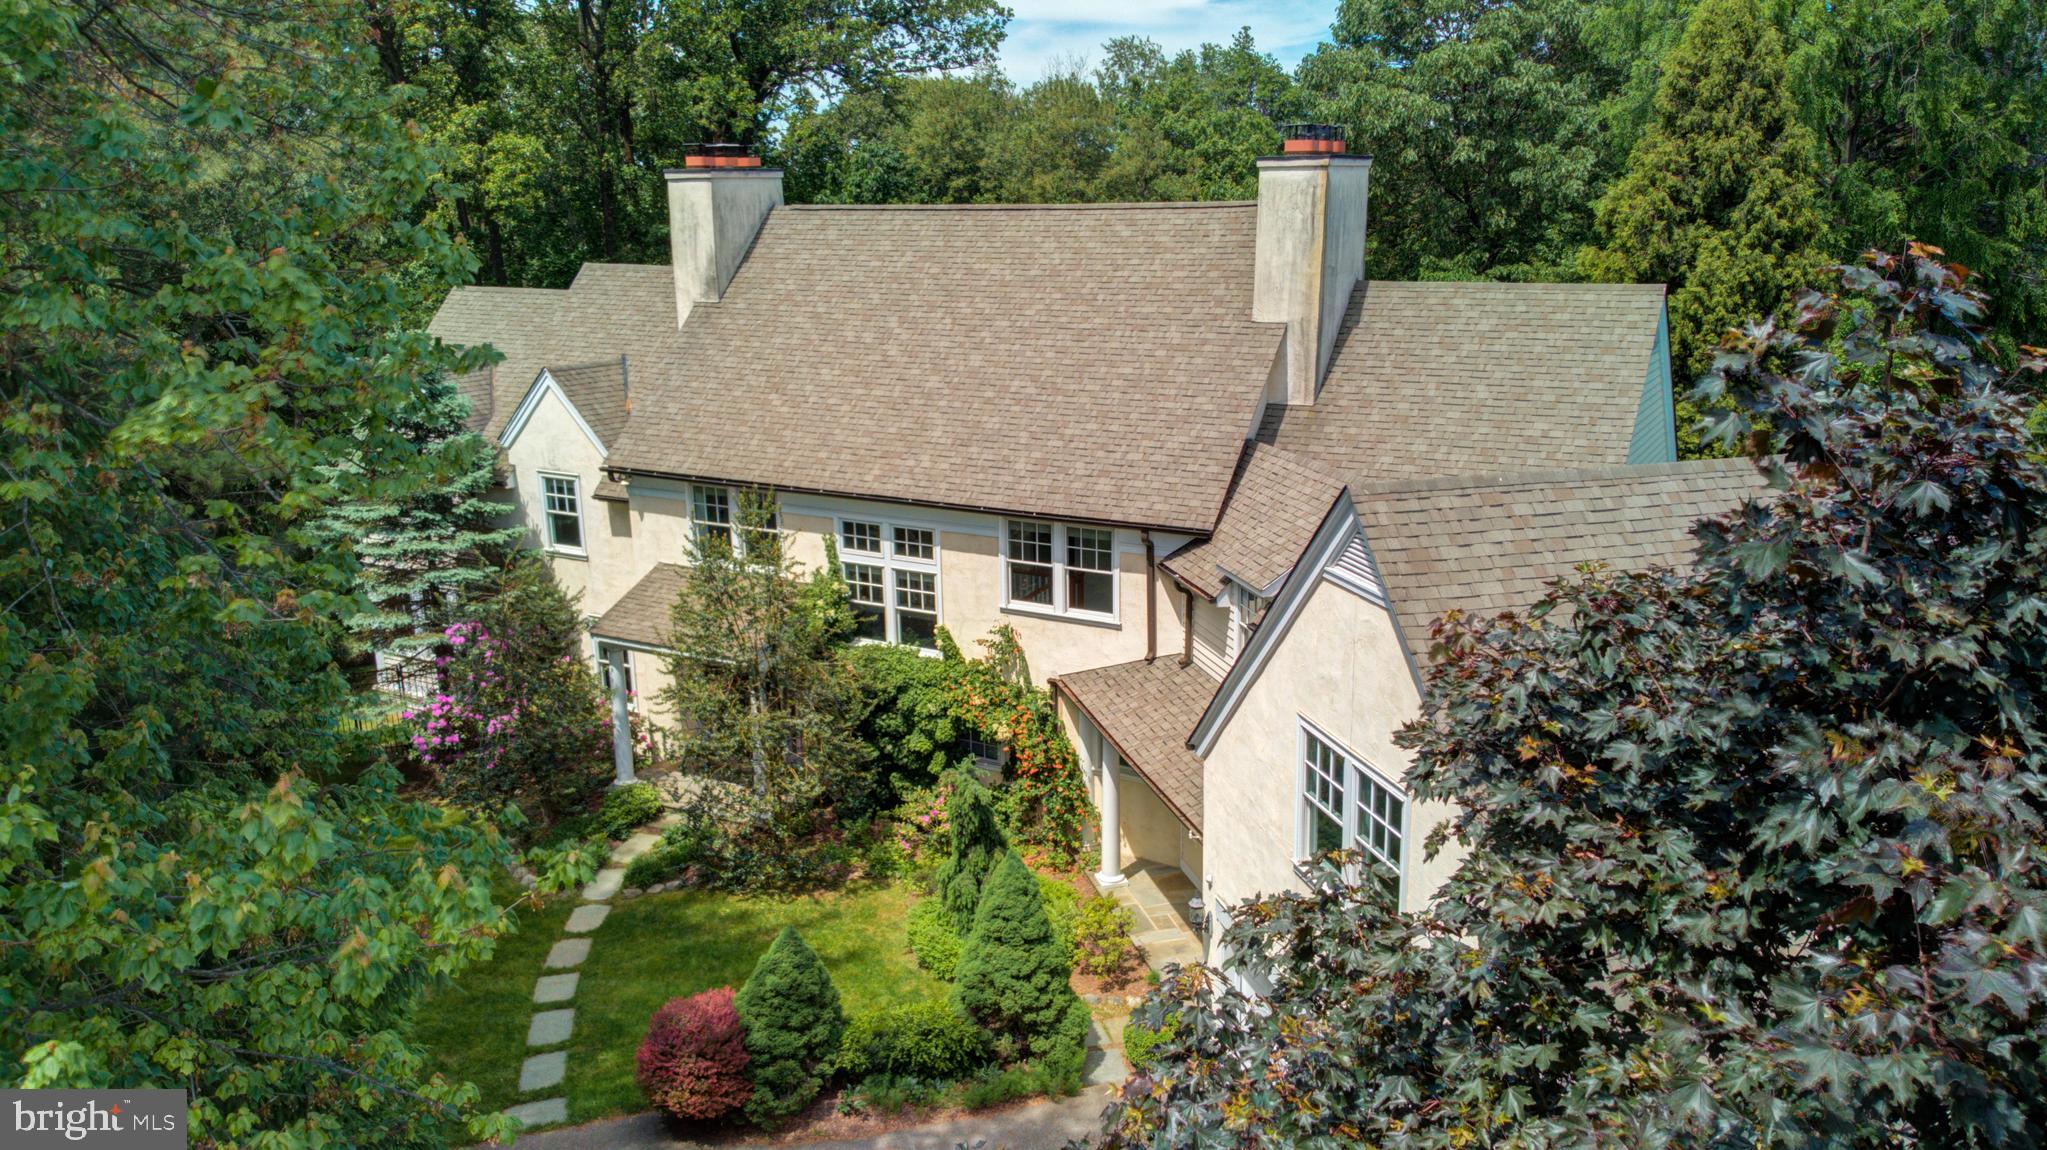 an aerial view of a house with a yard and large trees